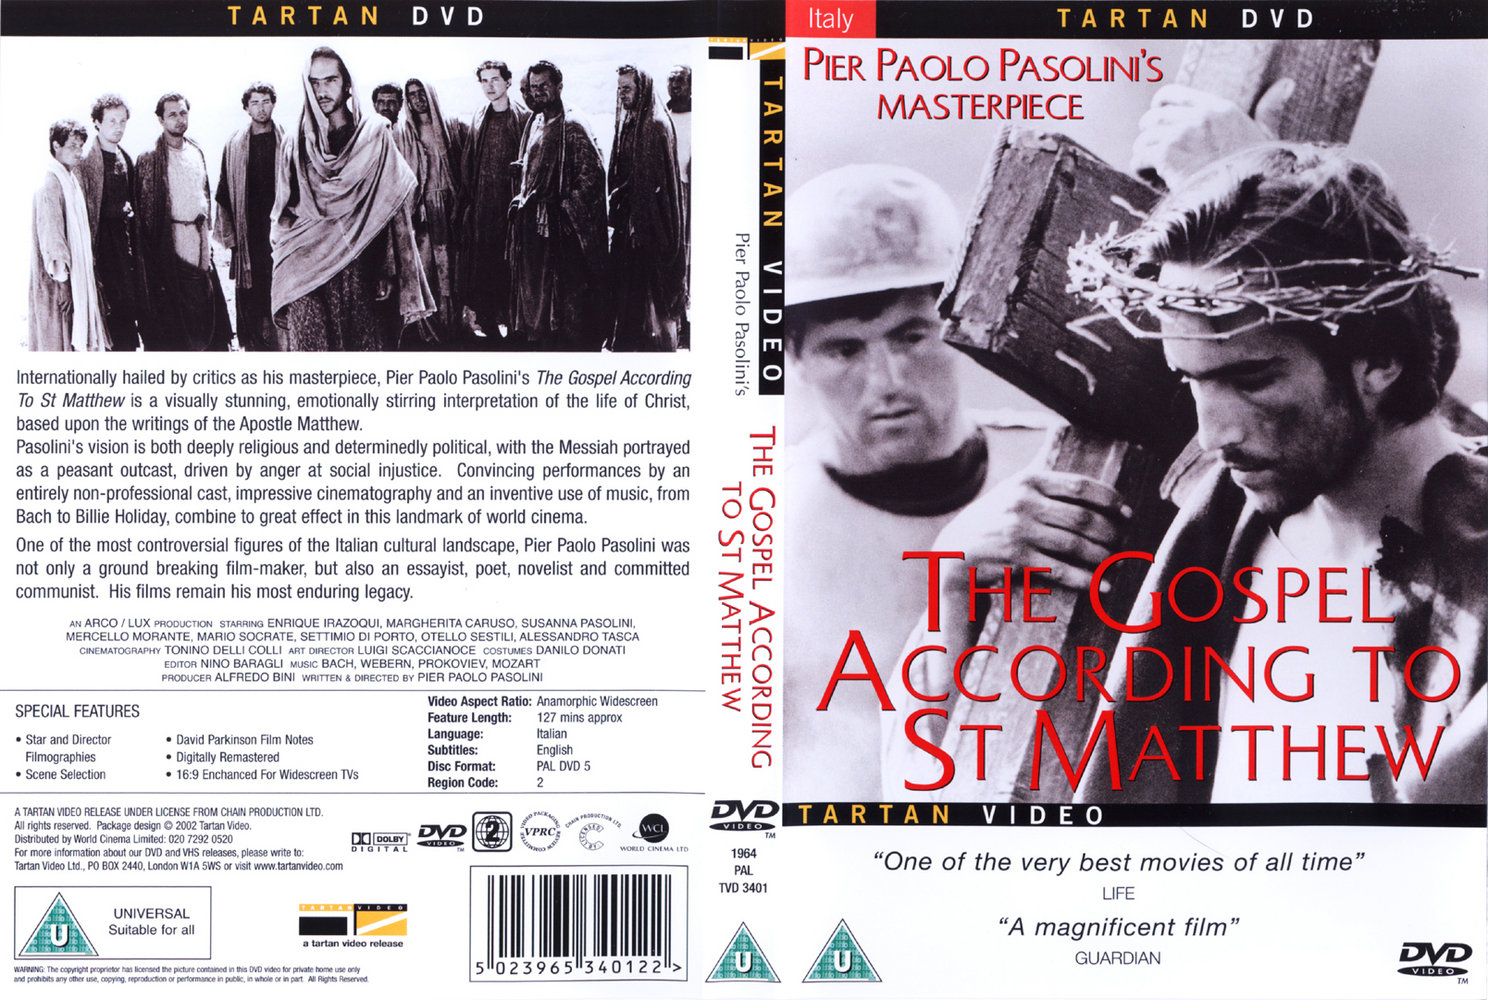 The Gospel According To St Matthew Pier Paolo Pasolini 1964 British Dvd Tartan Video Free Download Borrow And Streaming Internet Archive The place and couldn't distinguish the story, no connection between scenes ending was horrible; the gospel according to st matthew